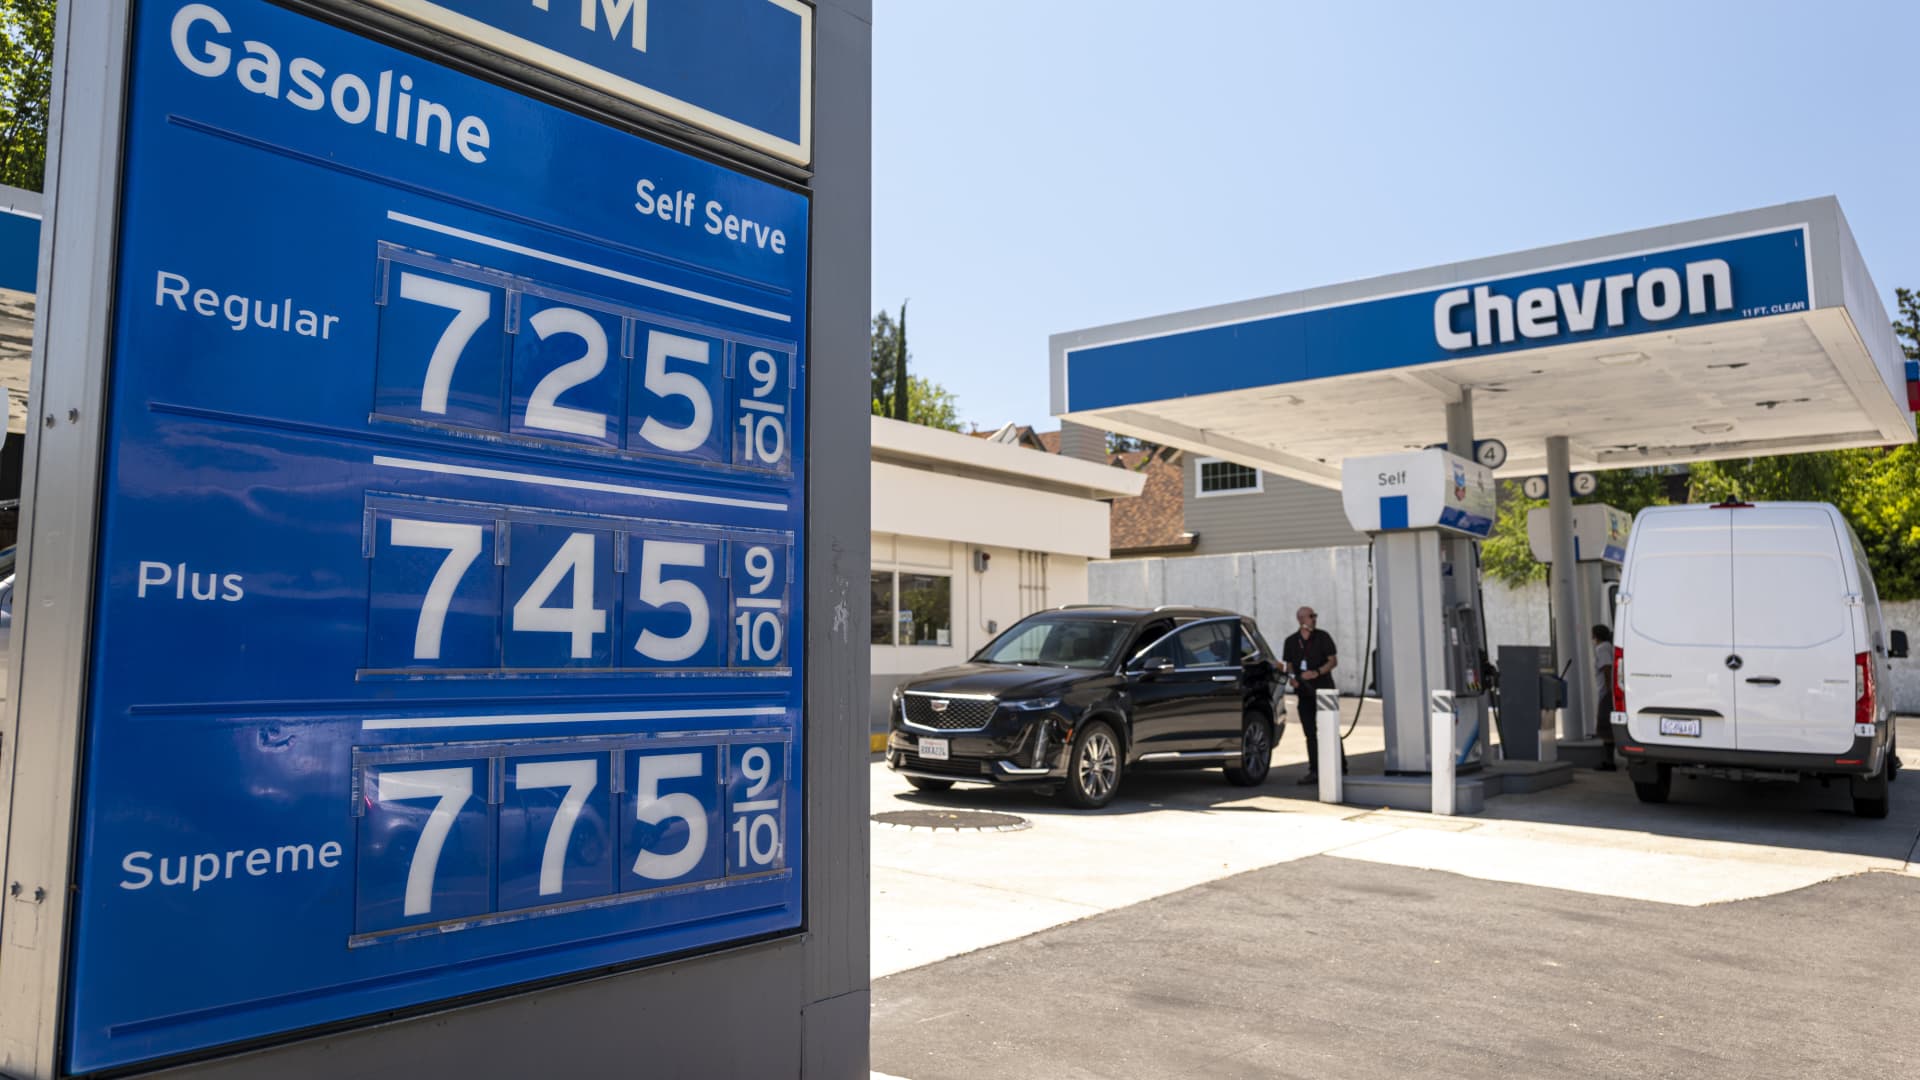 Gasoline prices top $5 a gallon nationally for the first time and are likely hea..